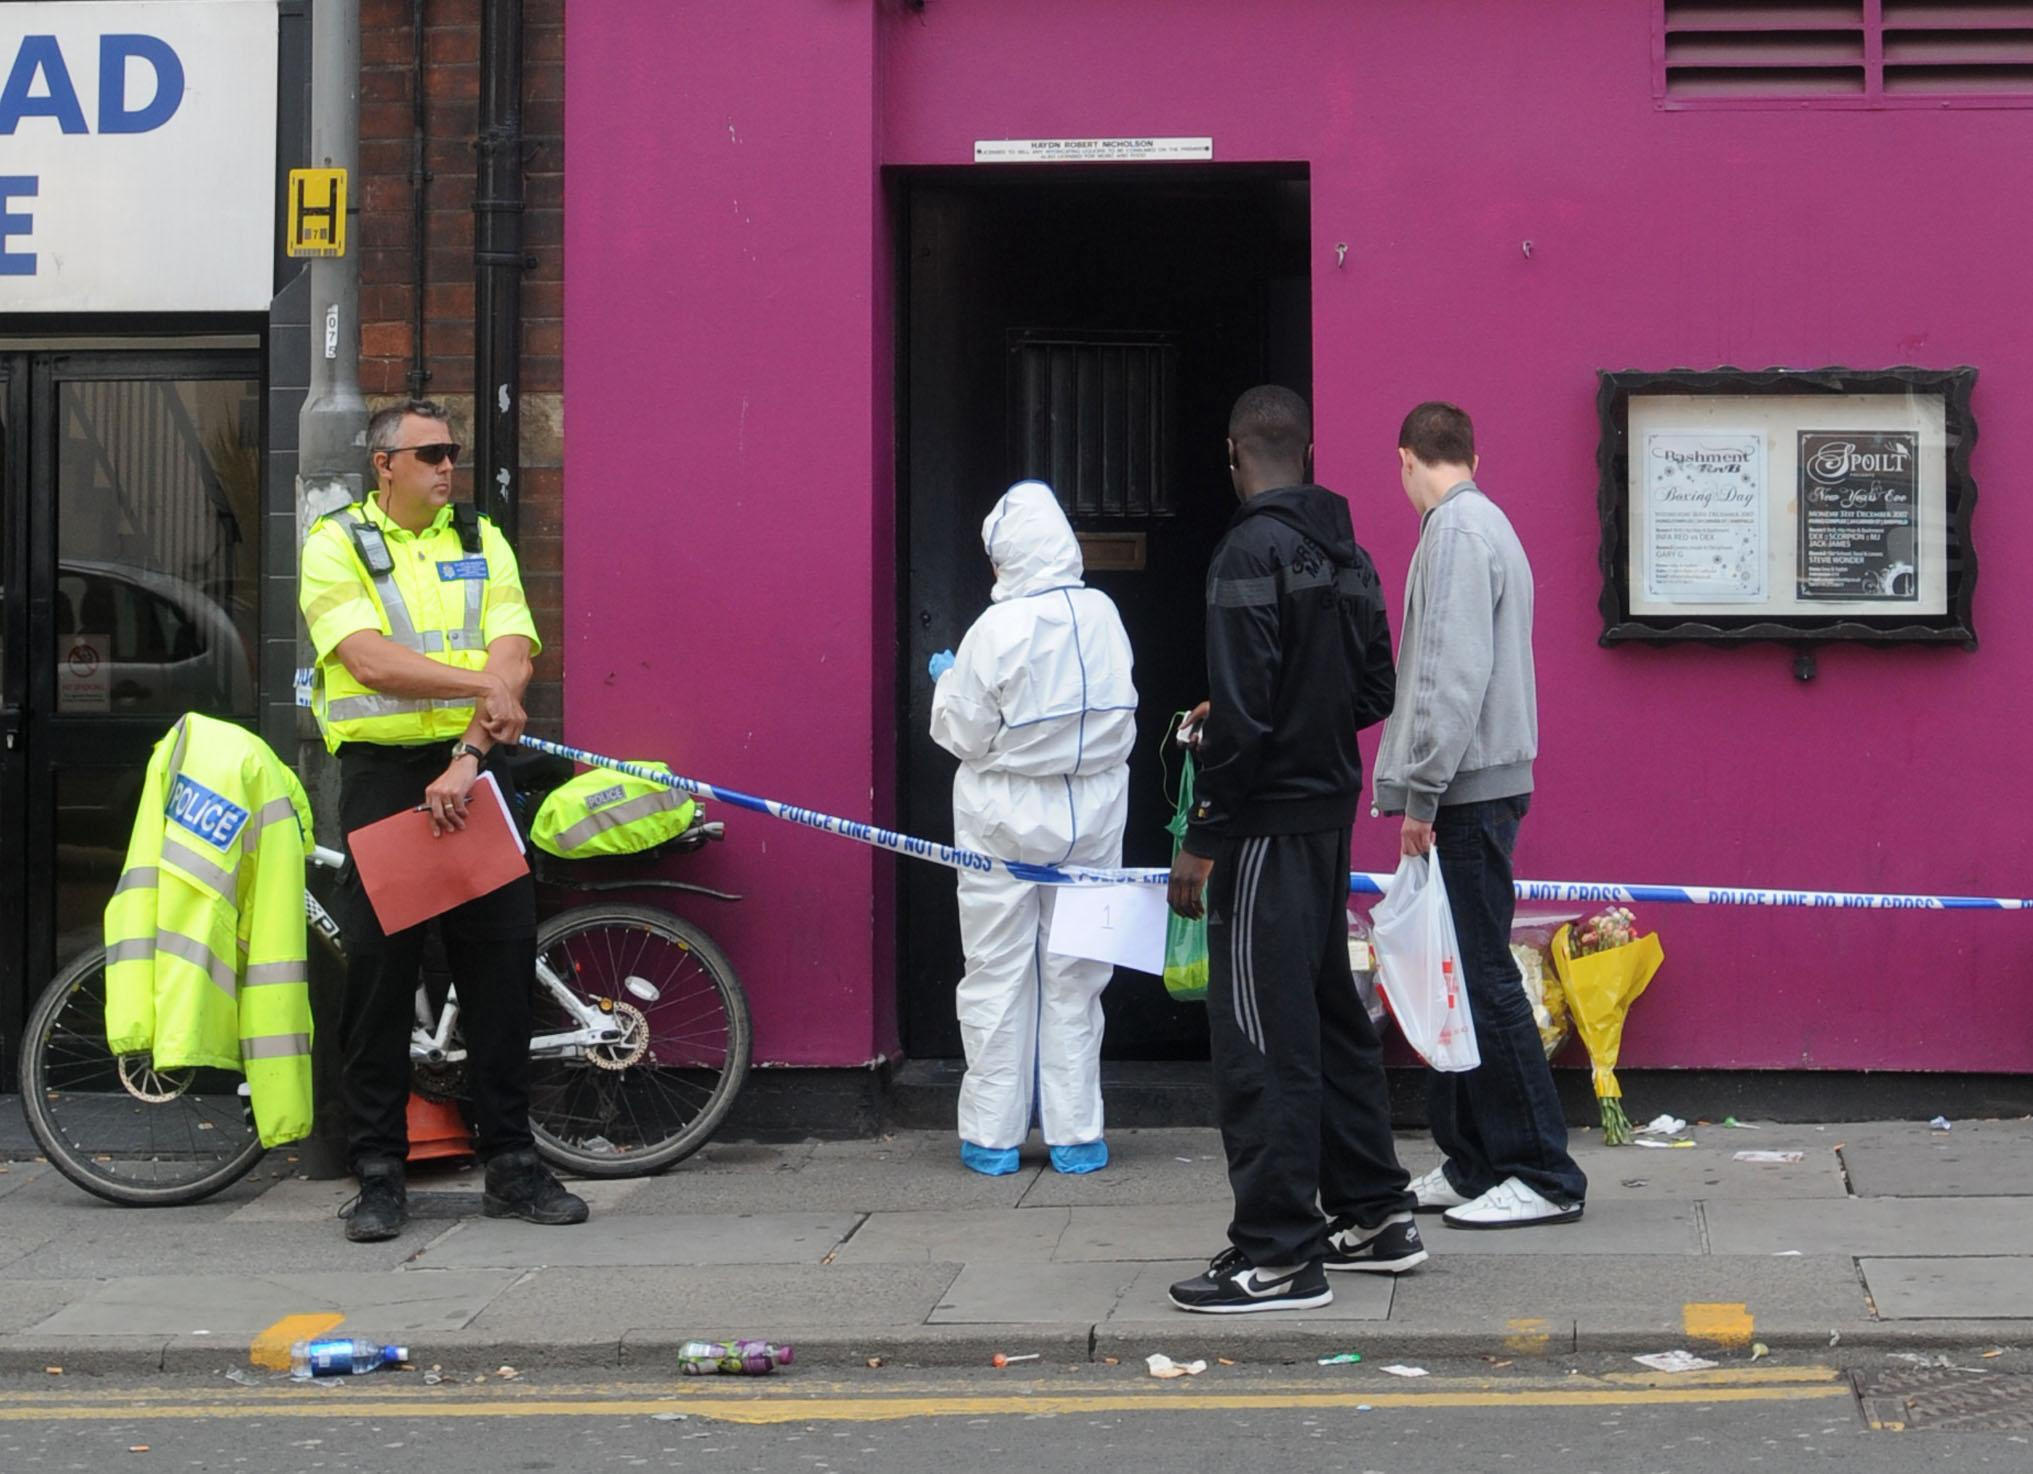 The doorway of a nightclub in Carver Street, where a man was stabbed to death